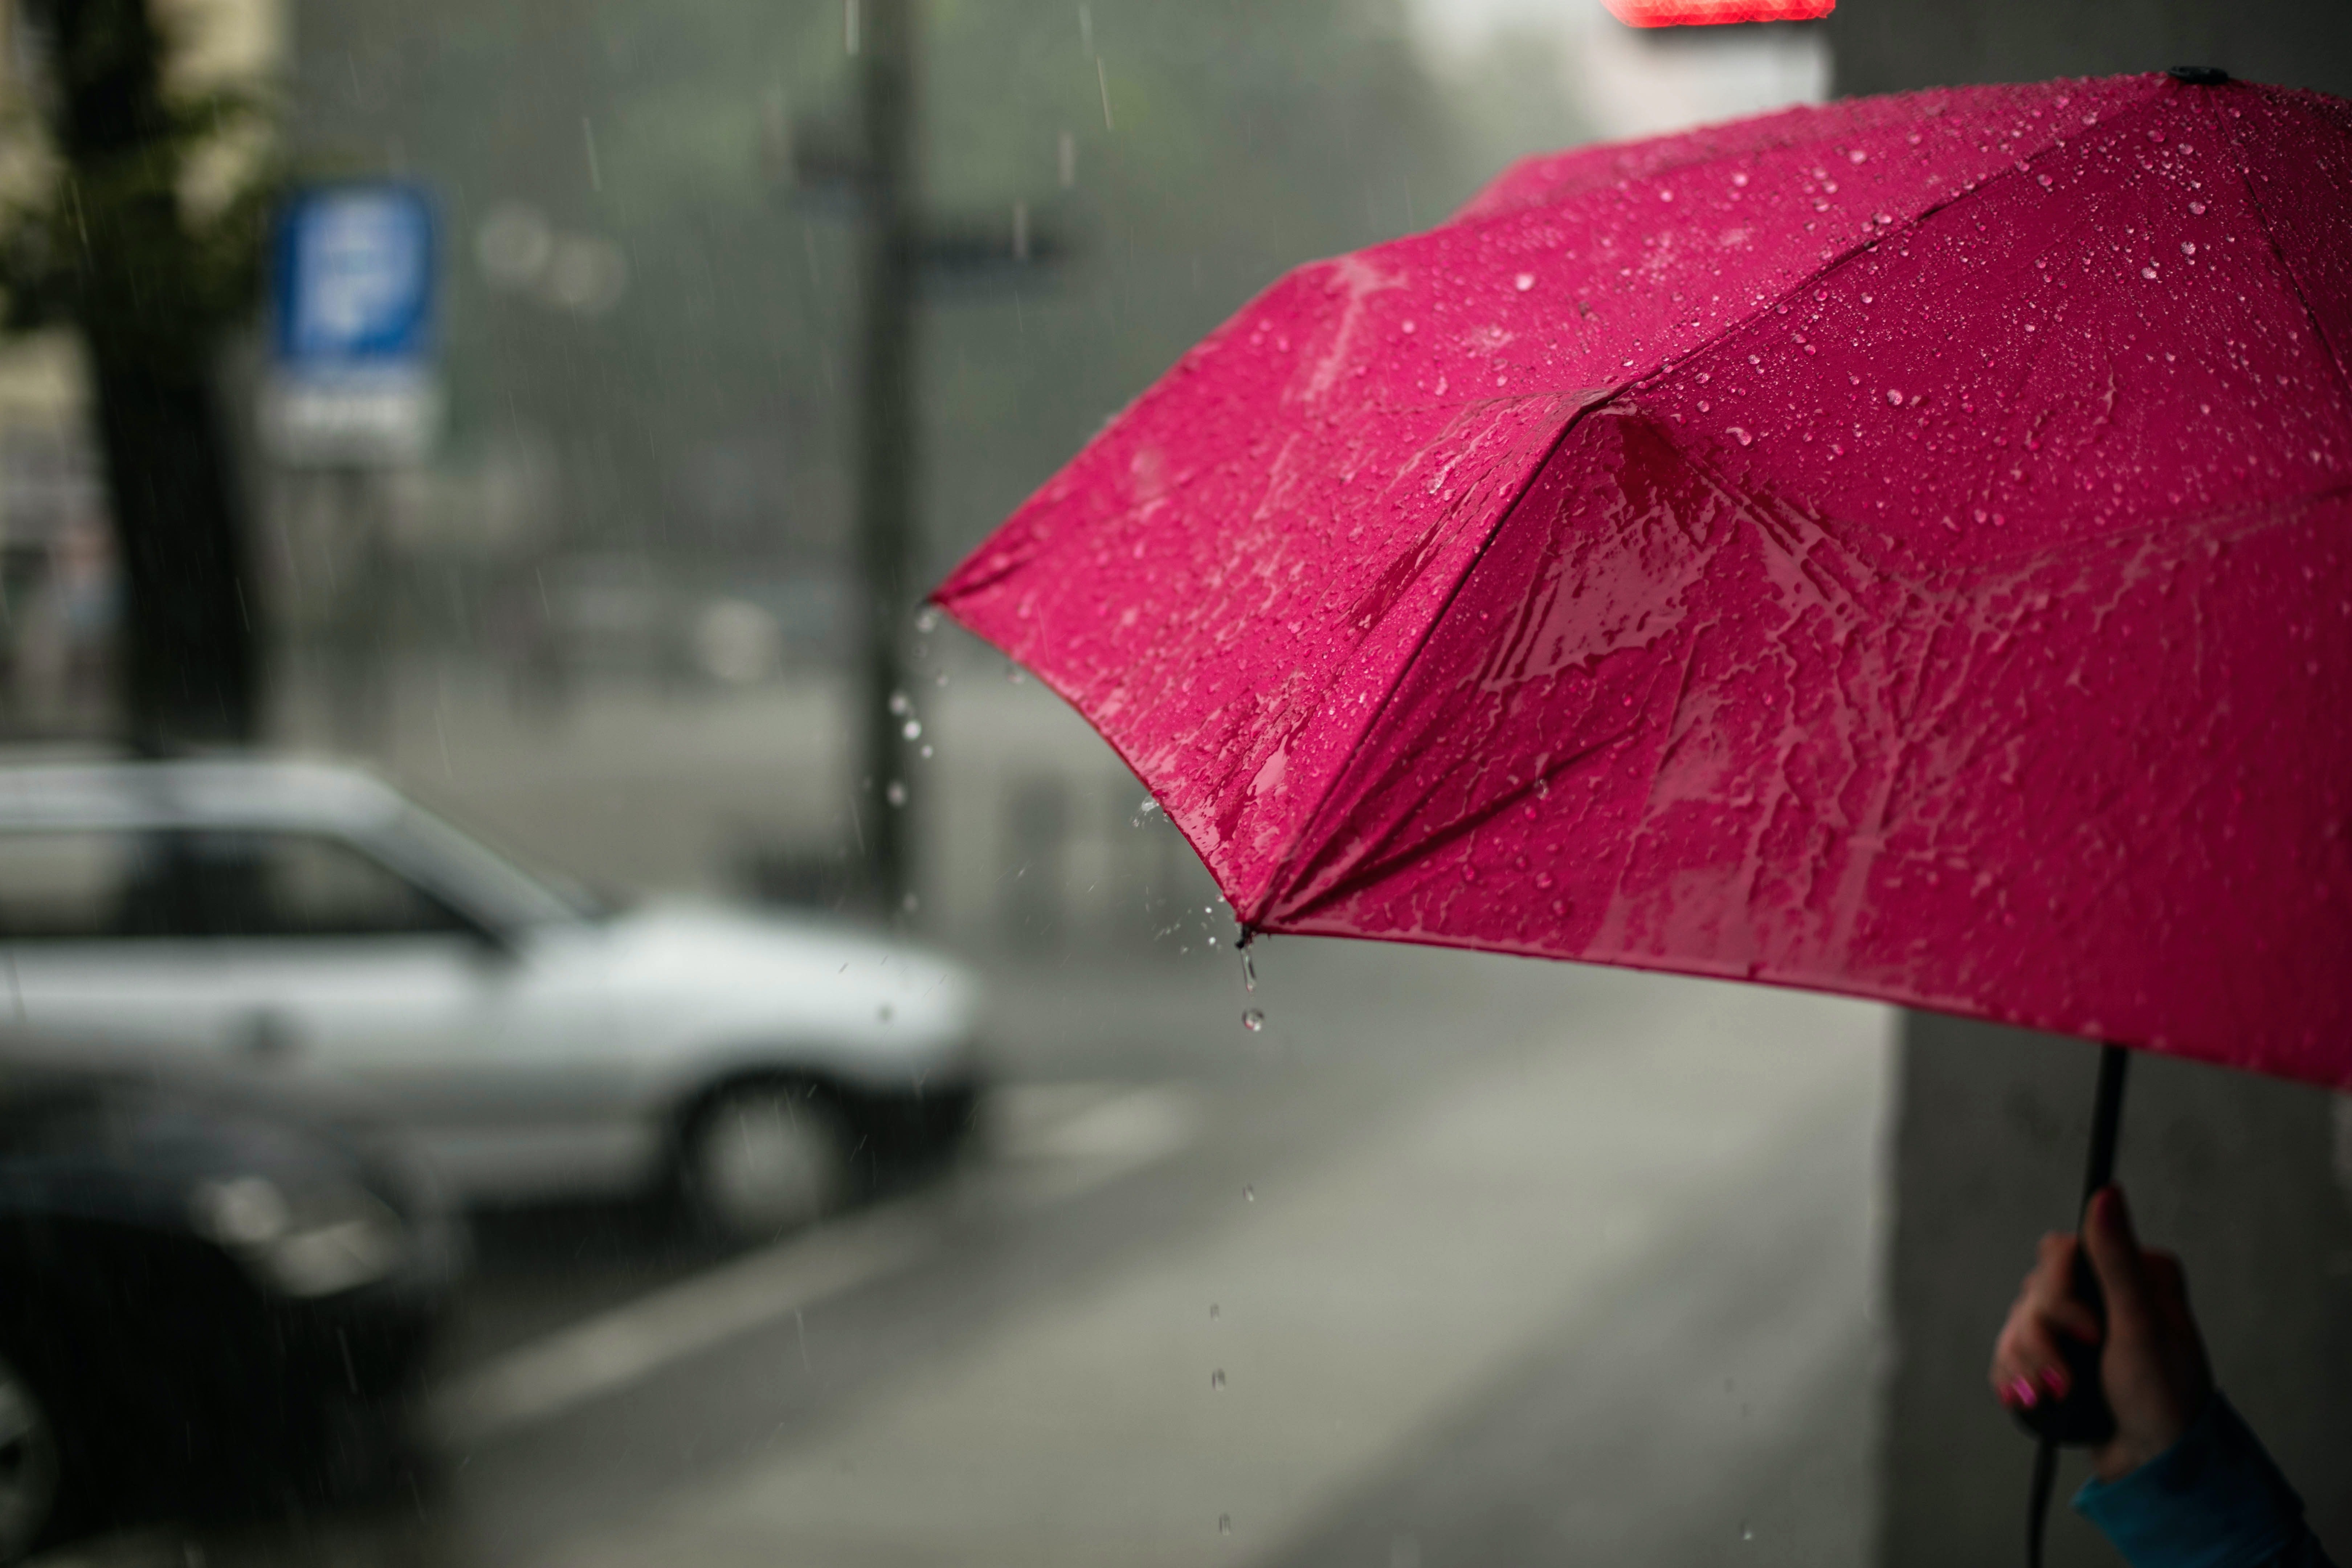 Angelina approached the man & offered him shelter to wait out the rain. | Source: Unsplash